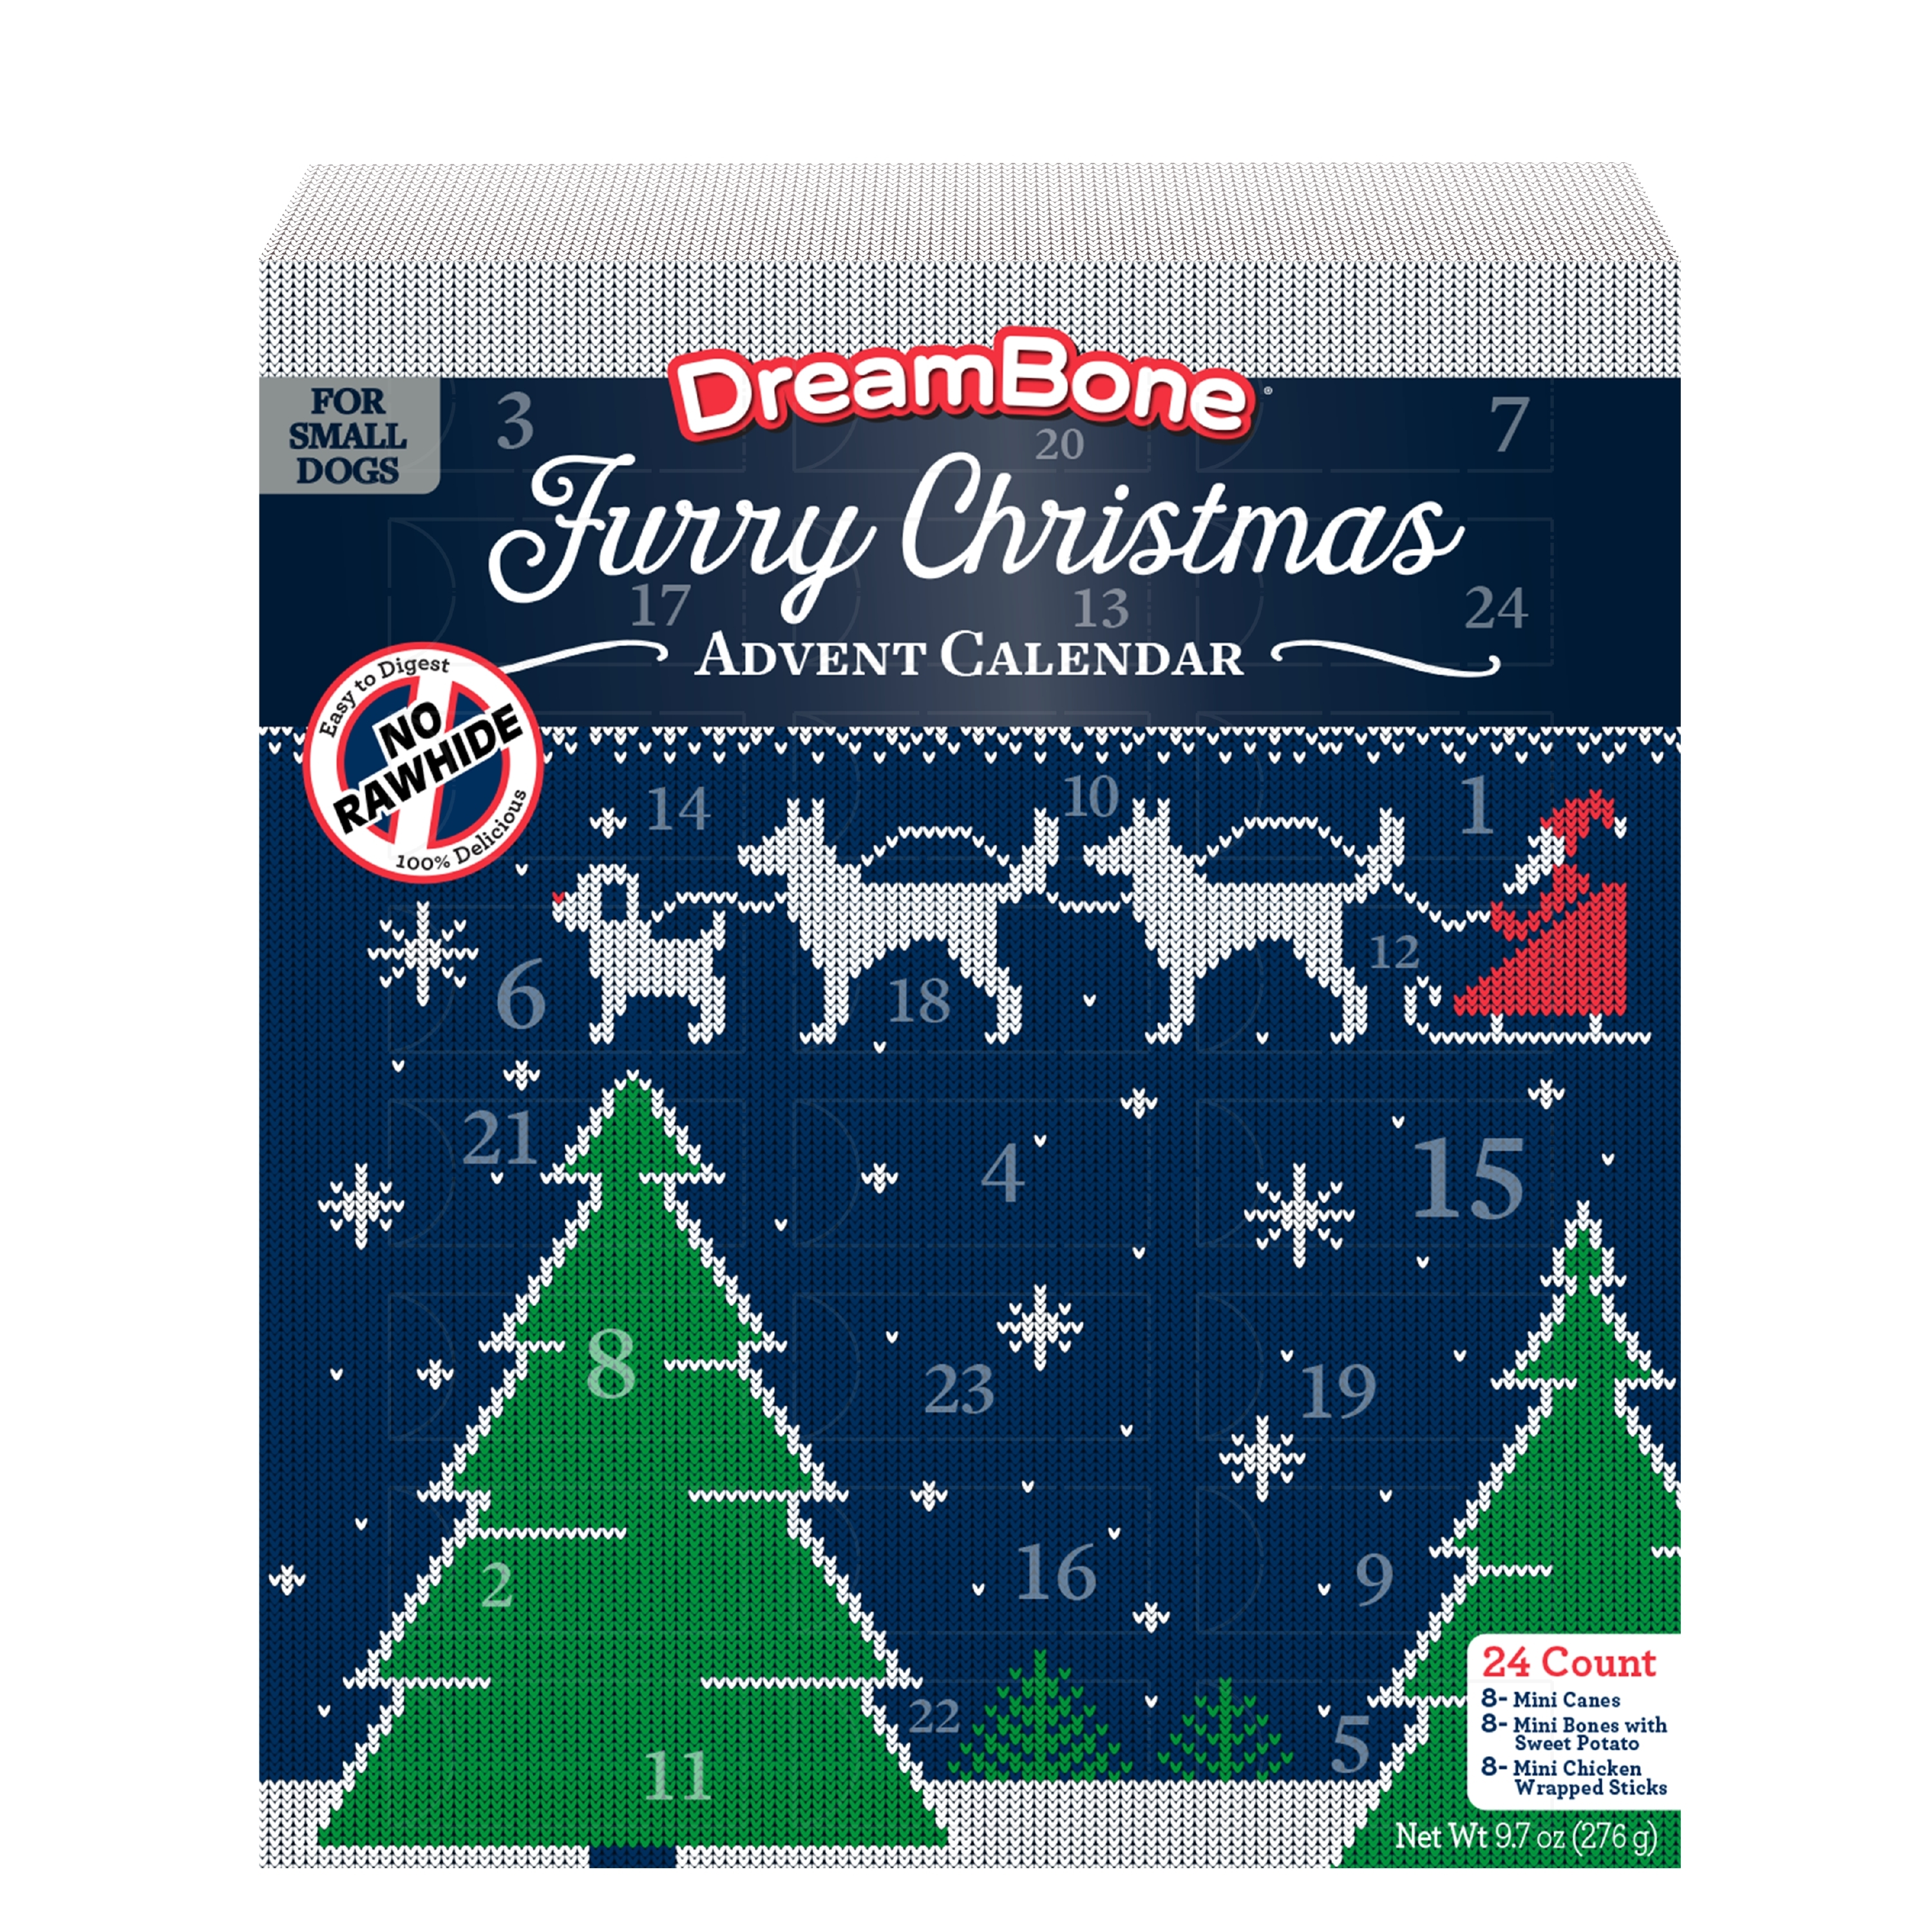 DreamBone Holiday Advent Calendar (24 Count) Real Chicken/Rawhide-Free Chews For Small Dogs $5.10